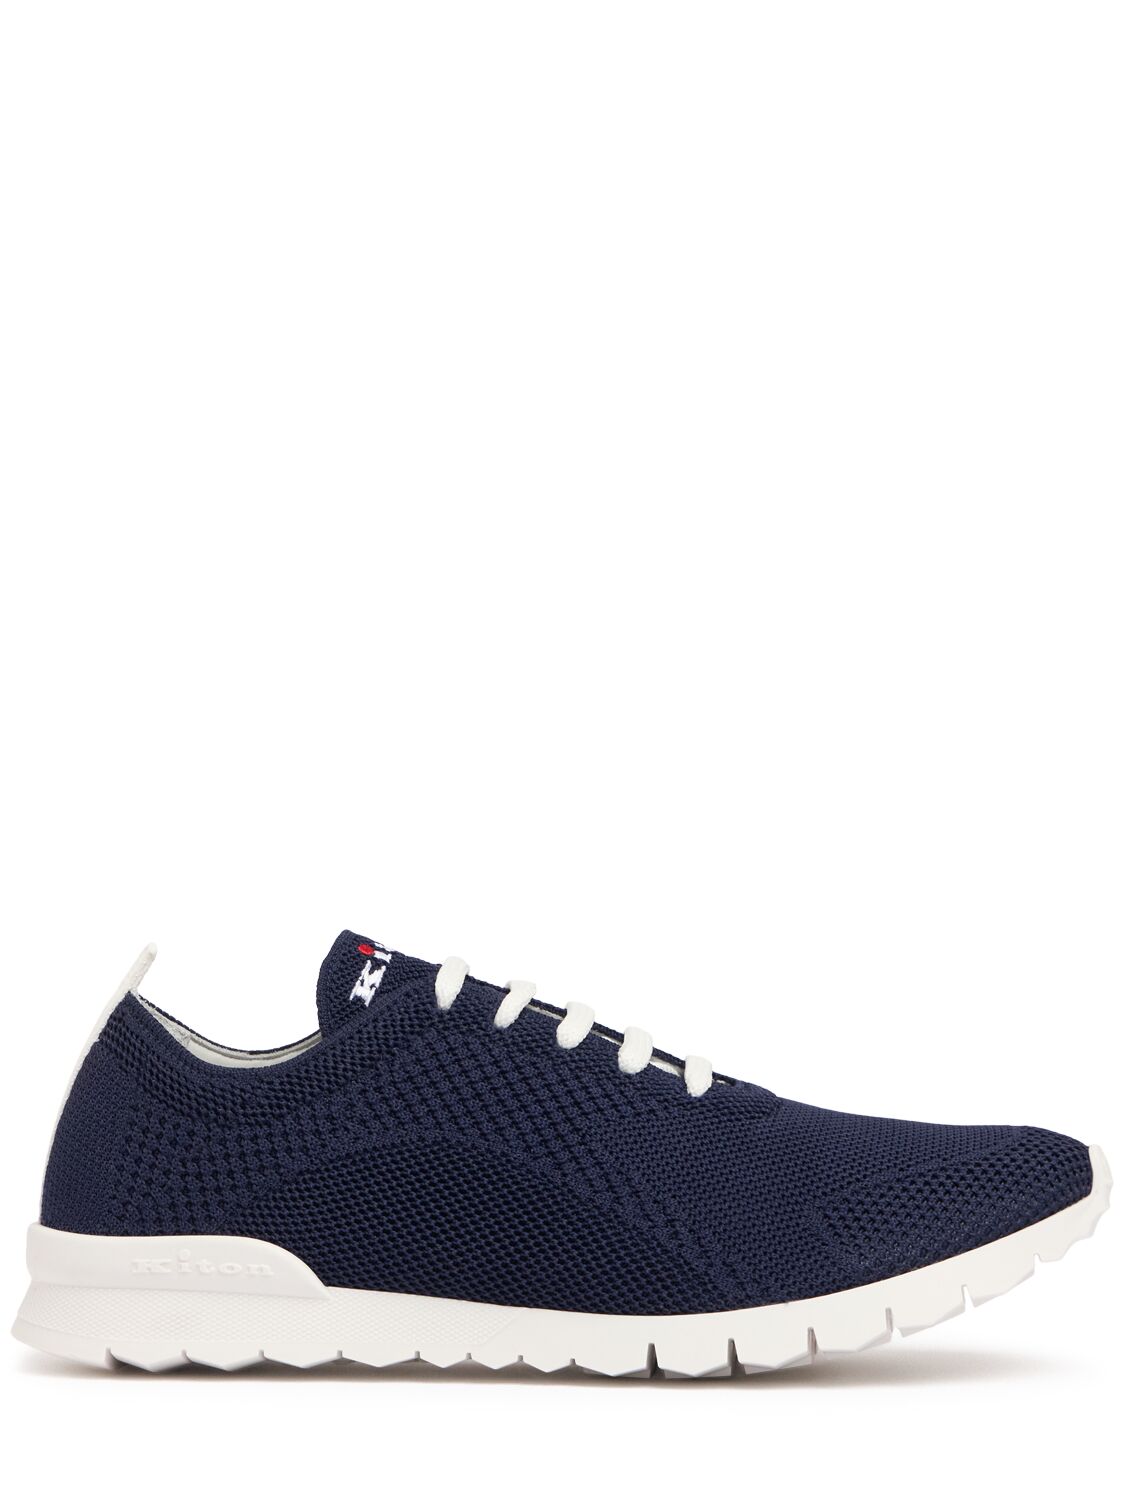 Kiton Cotton Knit Low Top Sneakers In Navy